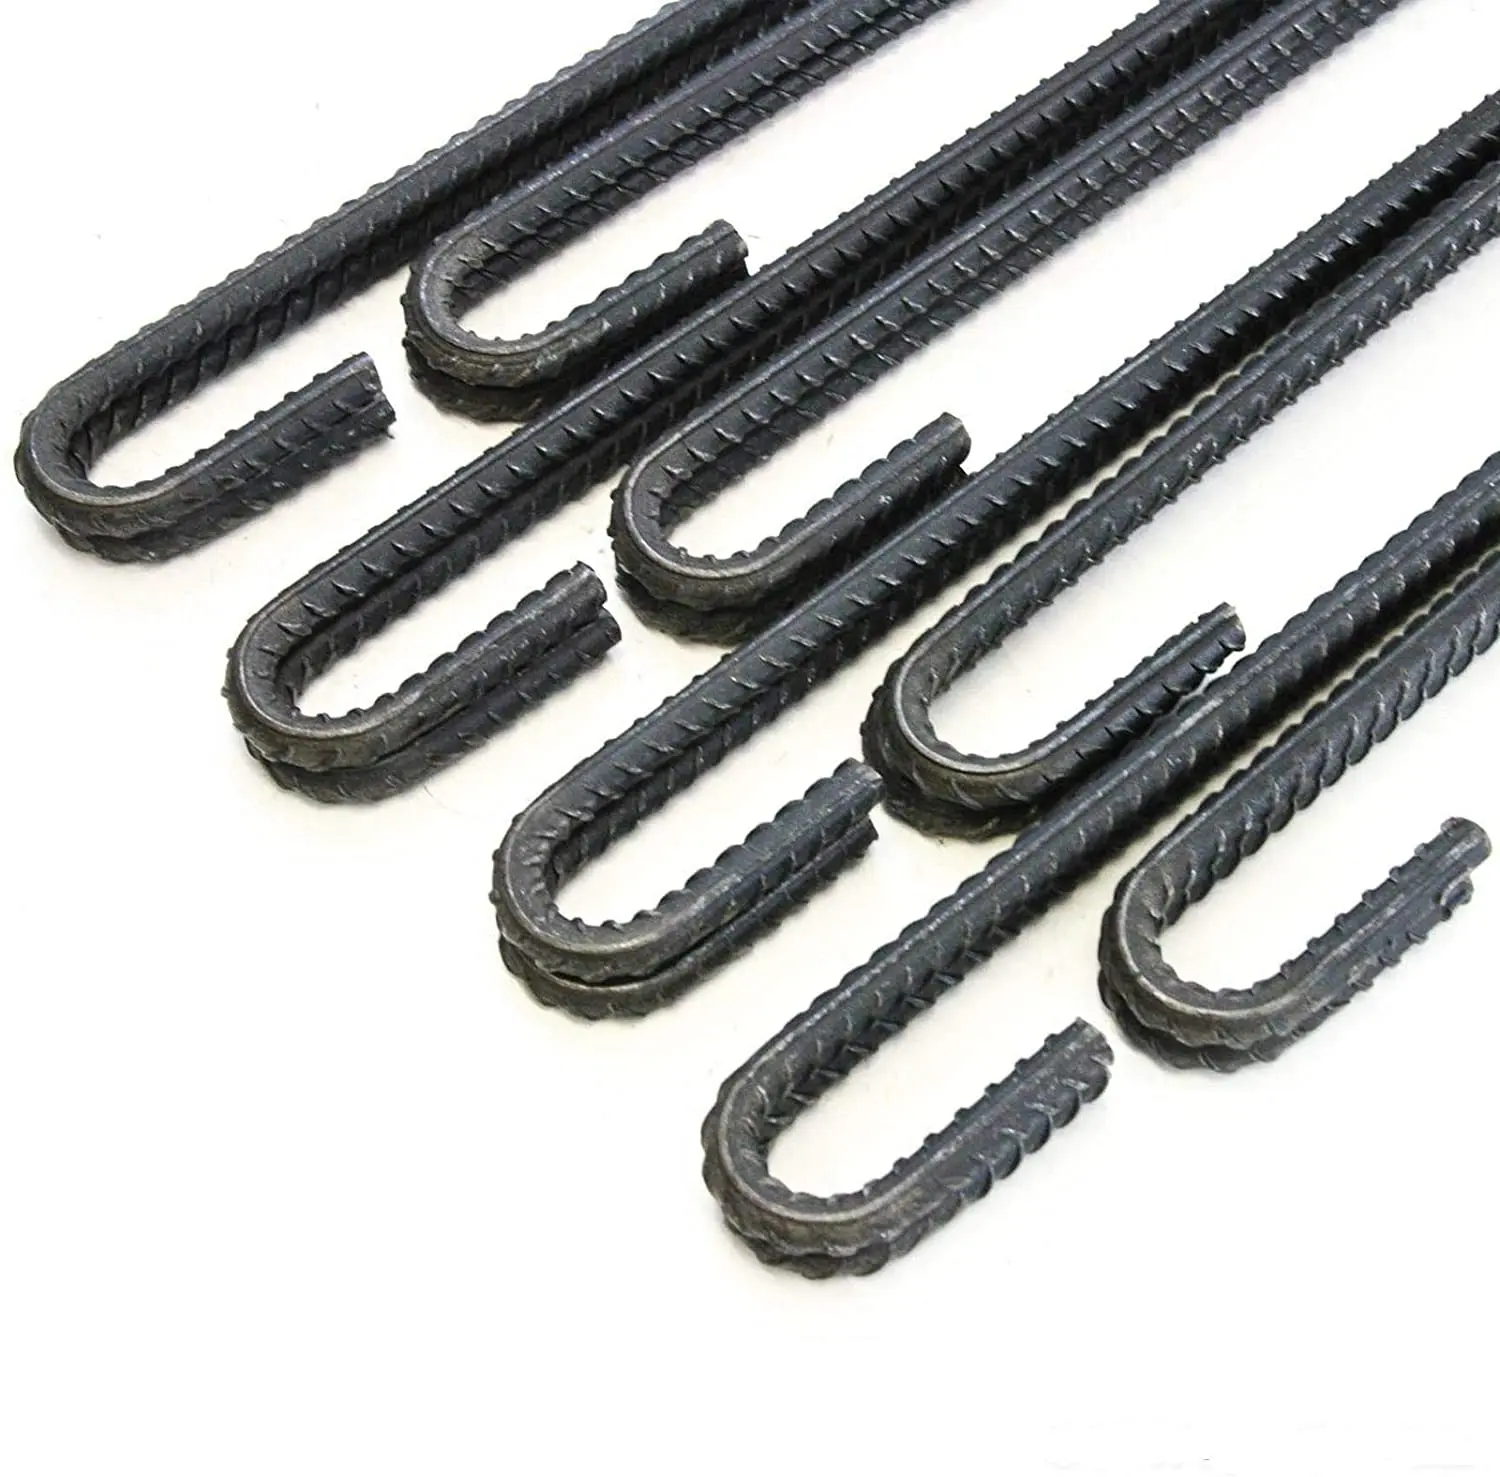 16" Ground Anchor Rebar Stakes Heavy Duty 8 Pcs J Hook Curved Steel Anchors 